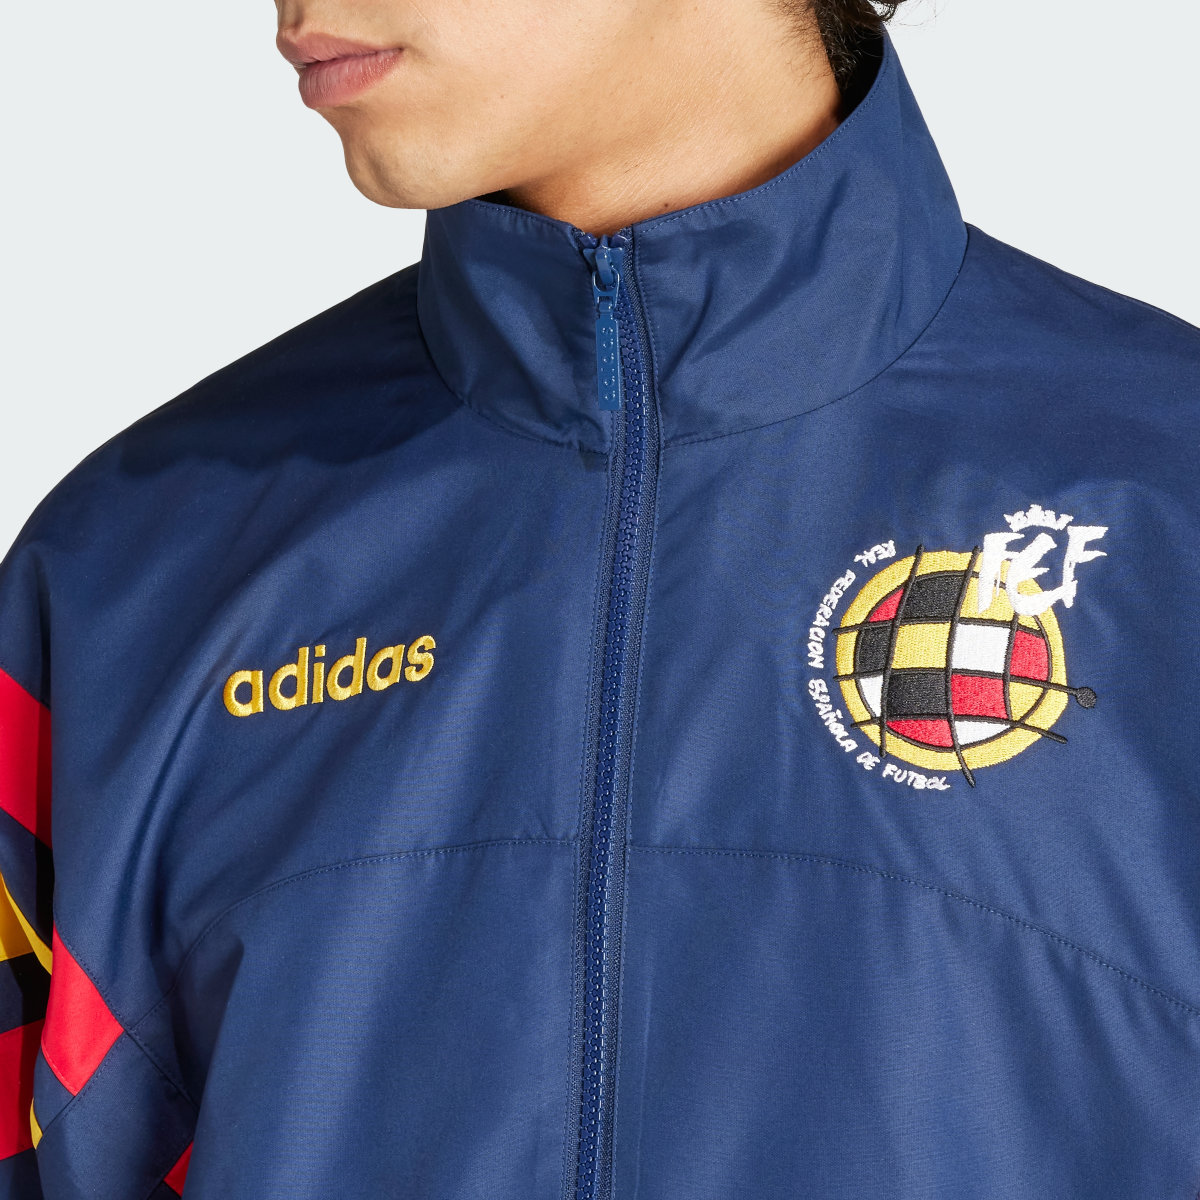 Adidas Spain 1996 Woven Track Top. 6